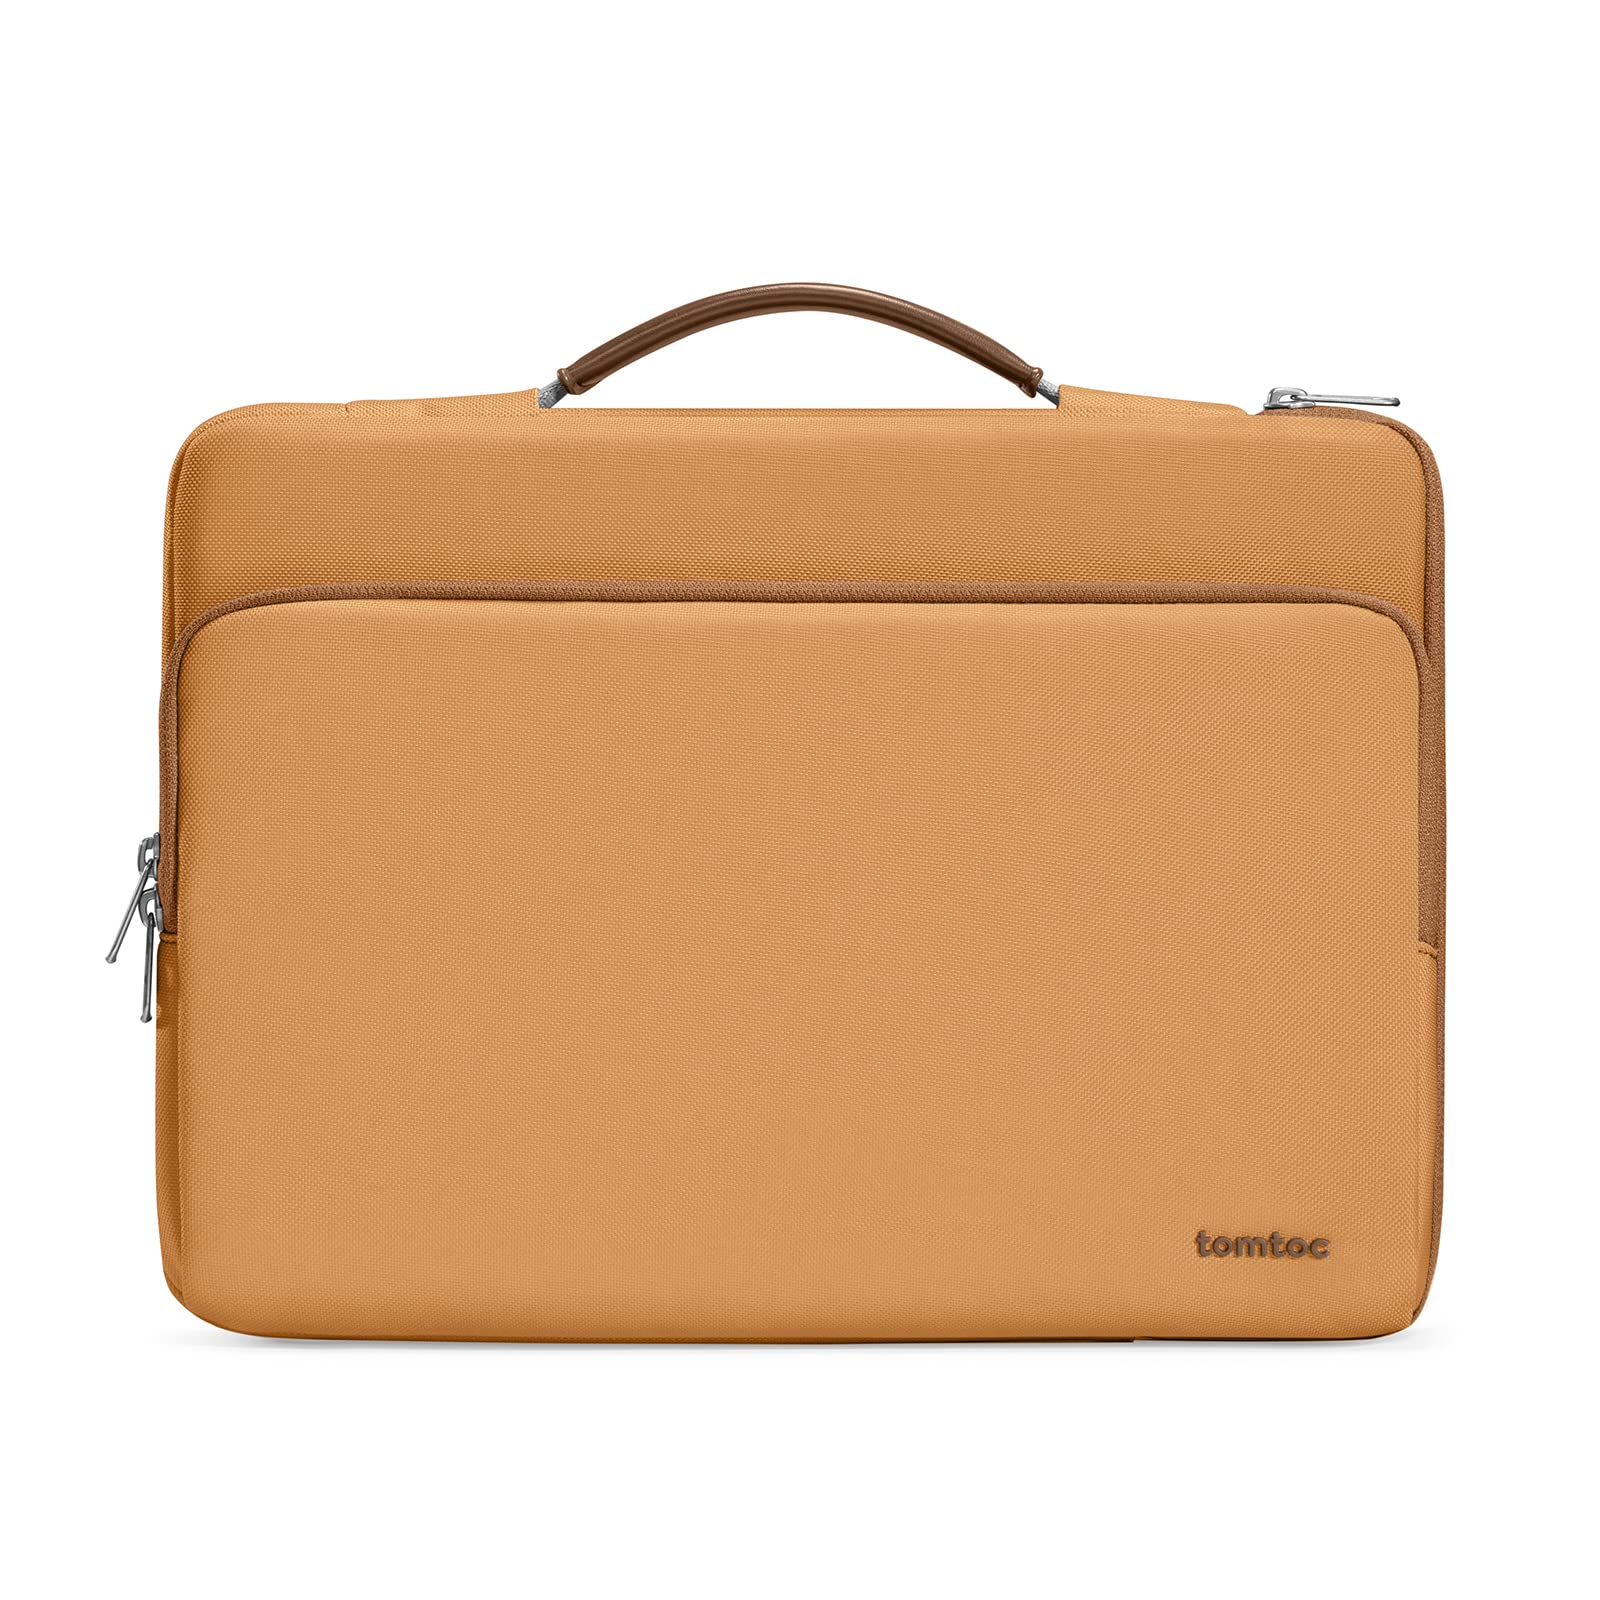 Leather Slim Laptop Bag for 13 inch laptop